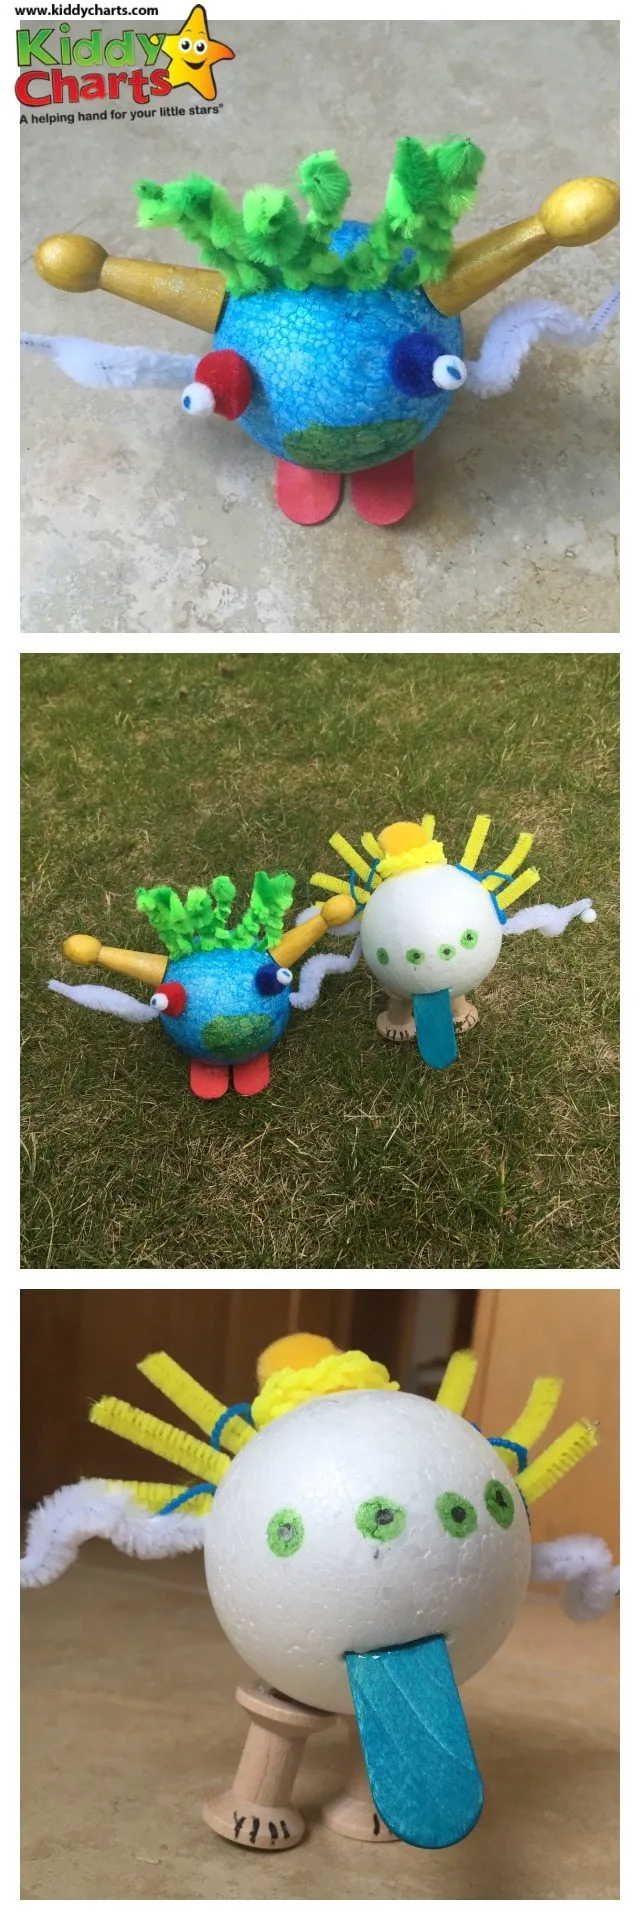 Looking for monsters to make with the kids? Try these out - we found them really easy to do, but it was perfect for helping the kids explore their own ideas. All you need is a simple polystyrene ball and a few standard crafty bits.